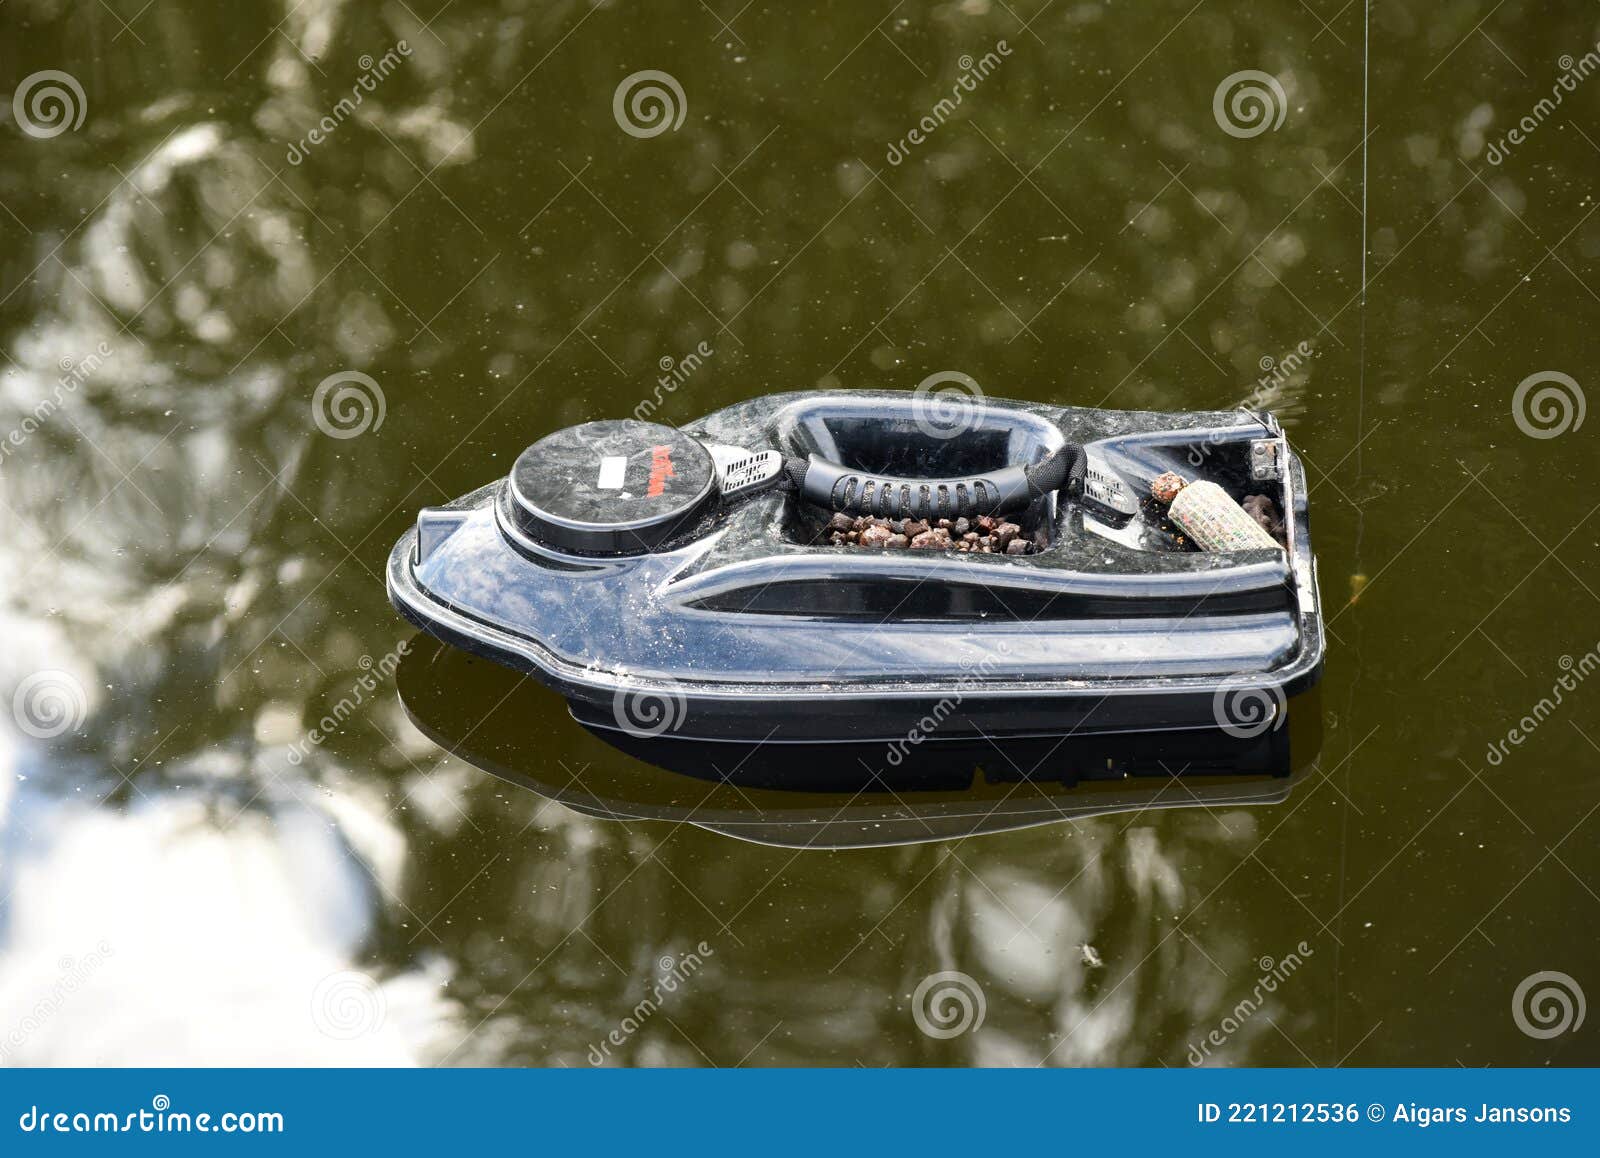 Nitaure, Latvia â€“ June 05, 2021: Gps Bait Boat for Fishing with Carp Bait  Floating on Water Editorial Photo - Image of controlled, accessories:  221212536